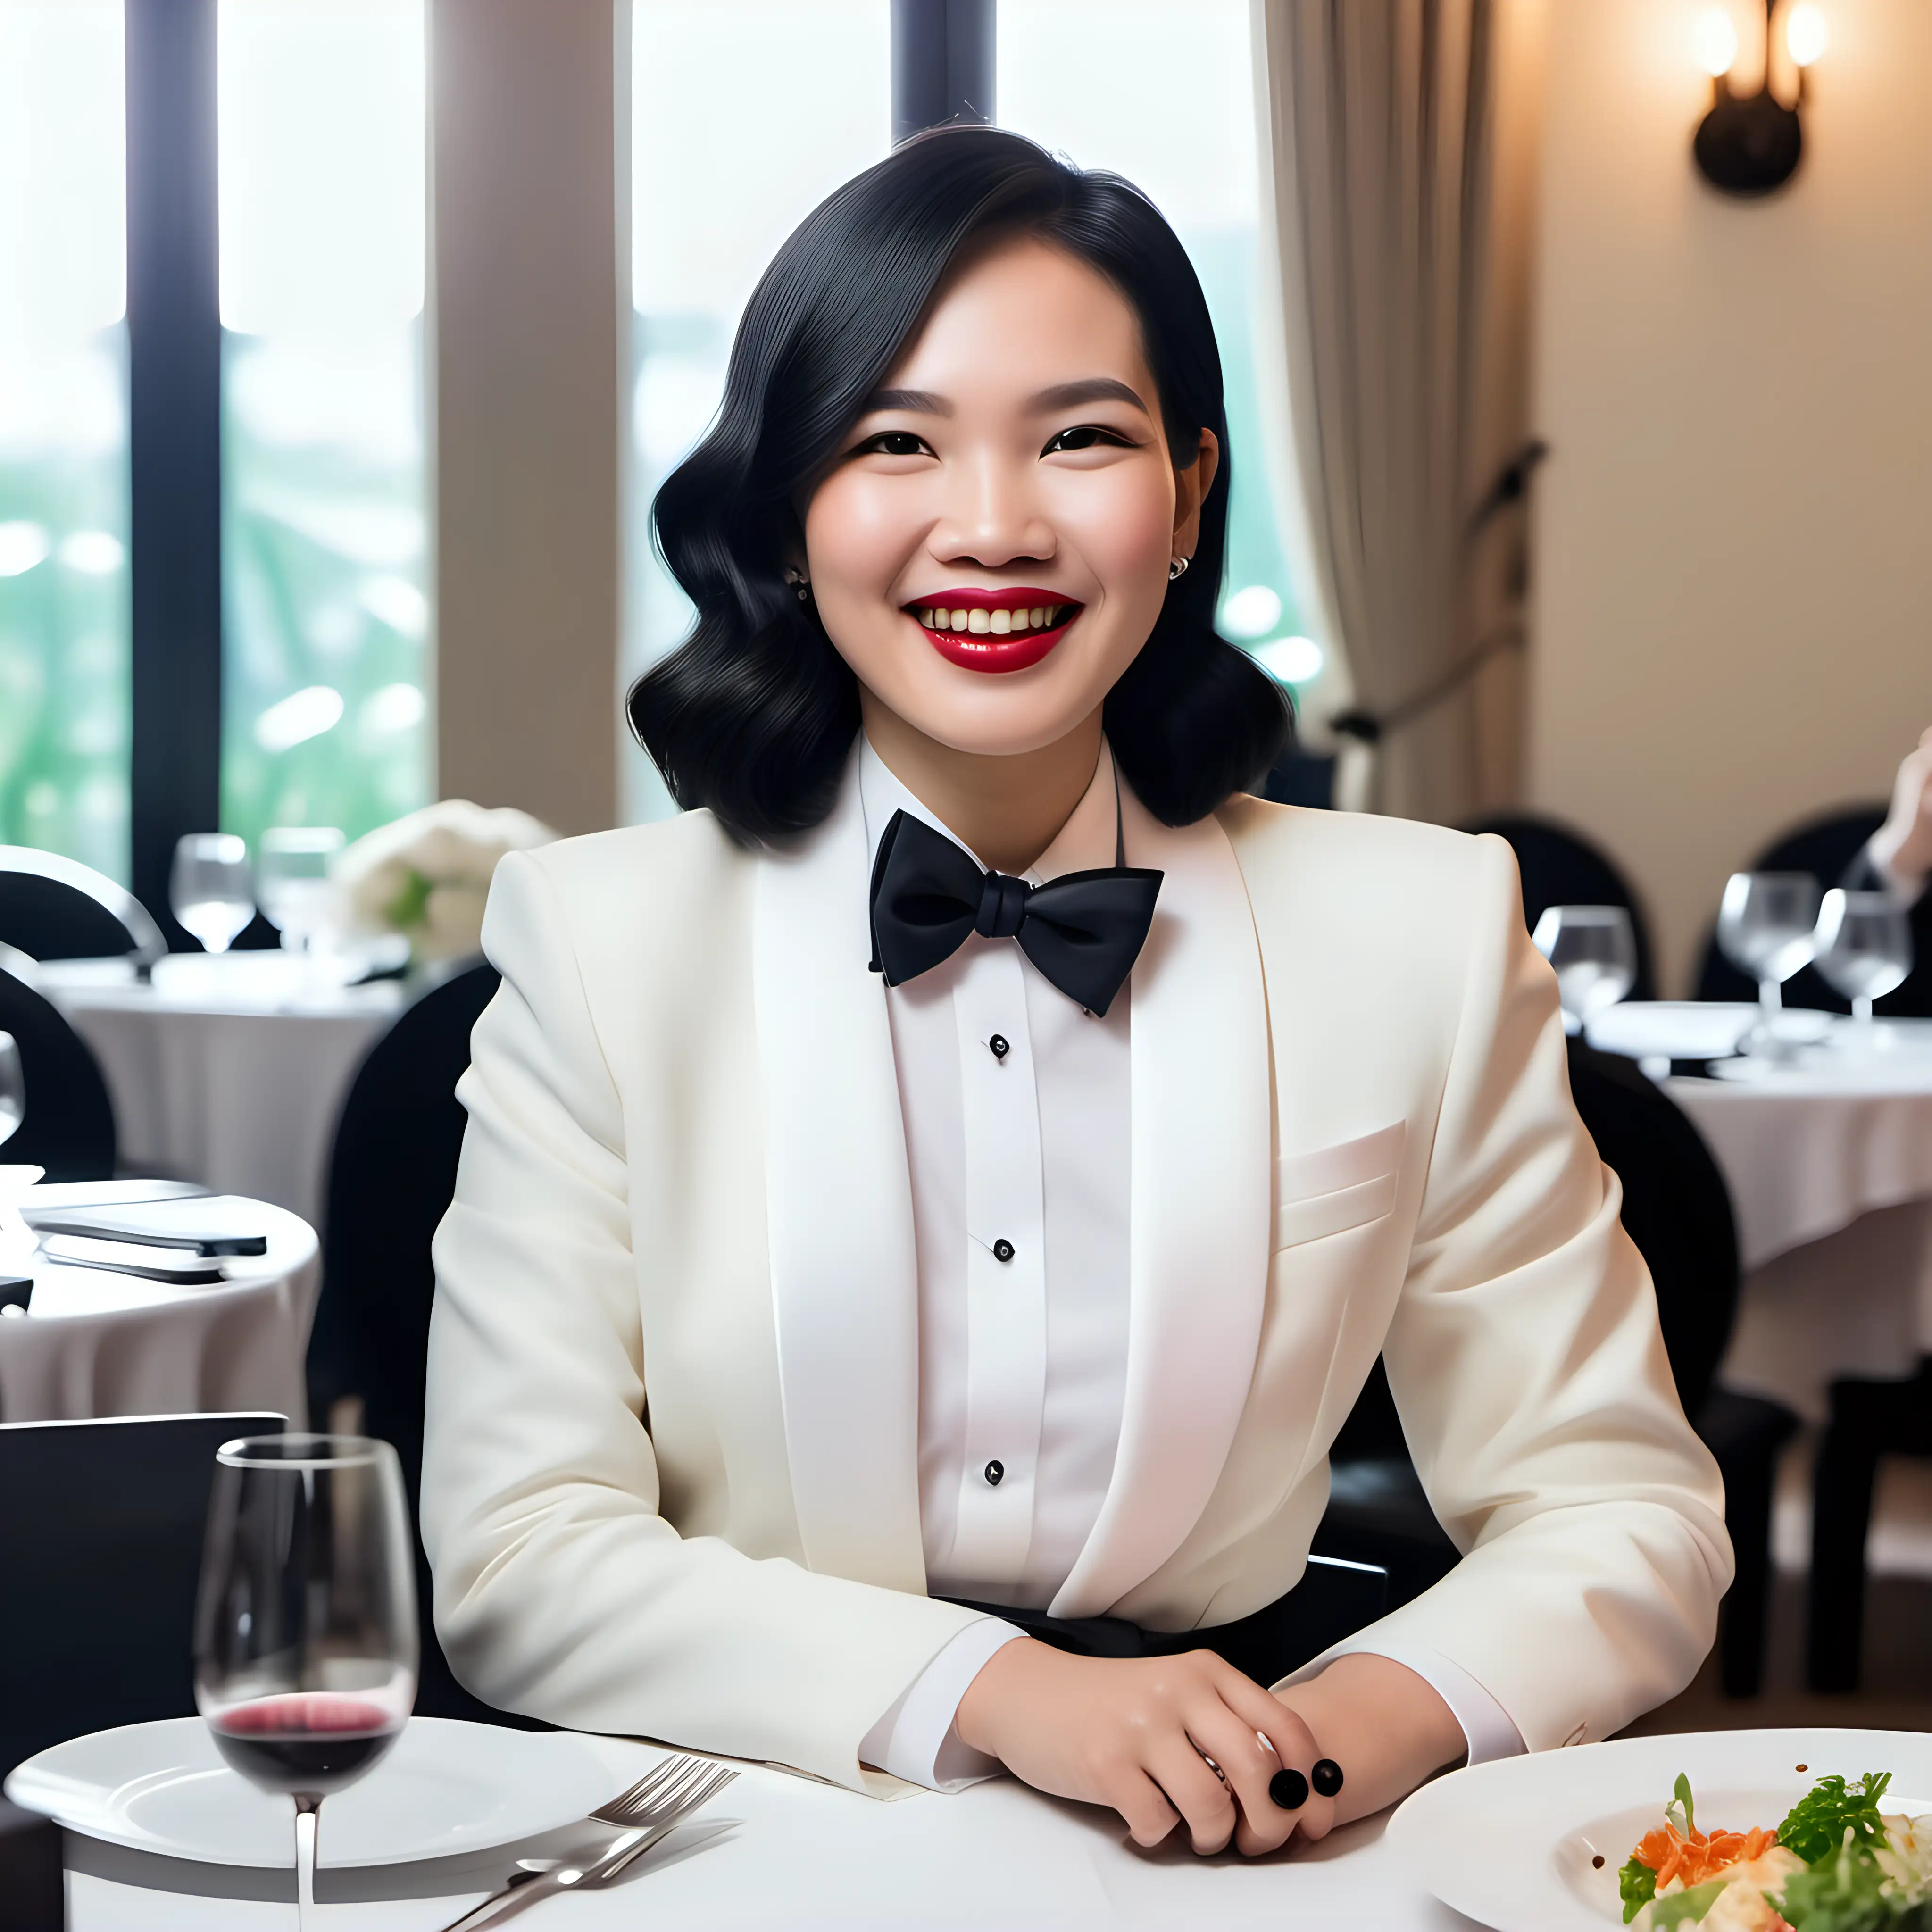 Elegant and sophisticated and smiling and laughing and confident 30 year old Vietnamese woman with shoulder length black hair and lipstick wearing a black tuxedo jacket with a (white shirt and a black bow tie and black cufflinks) and sitting at a dinner table.  Her jacket is open and has a corsage.